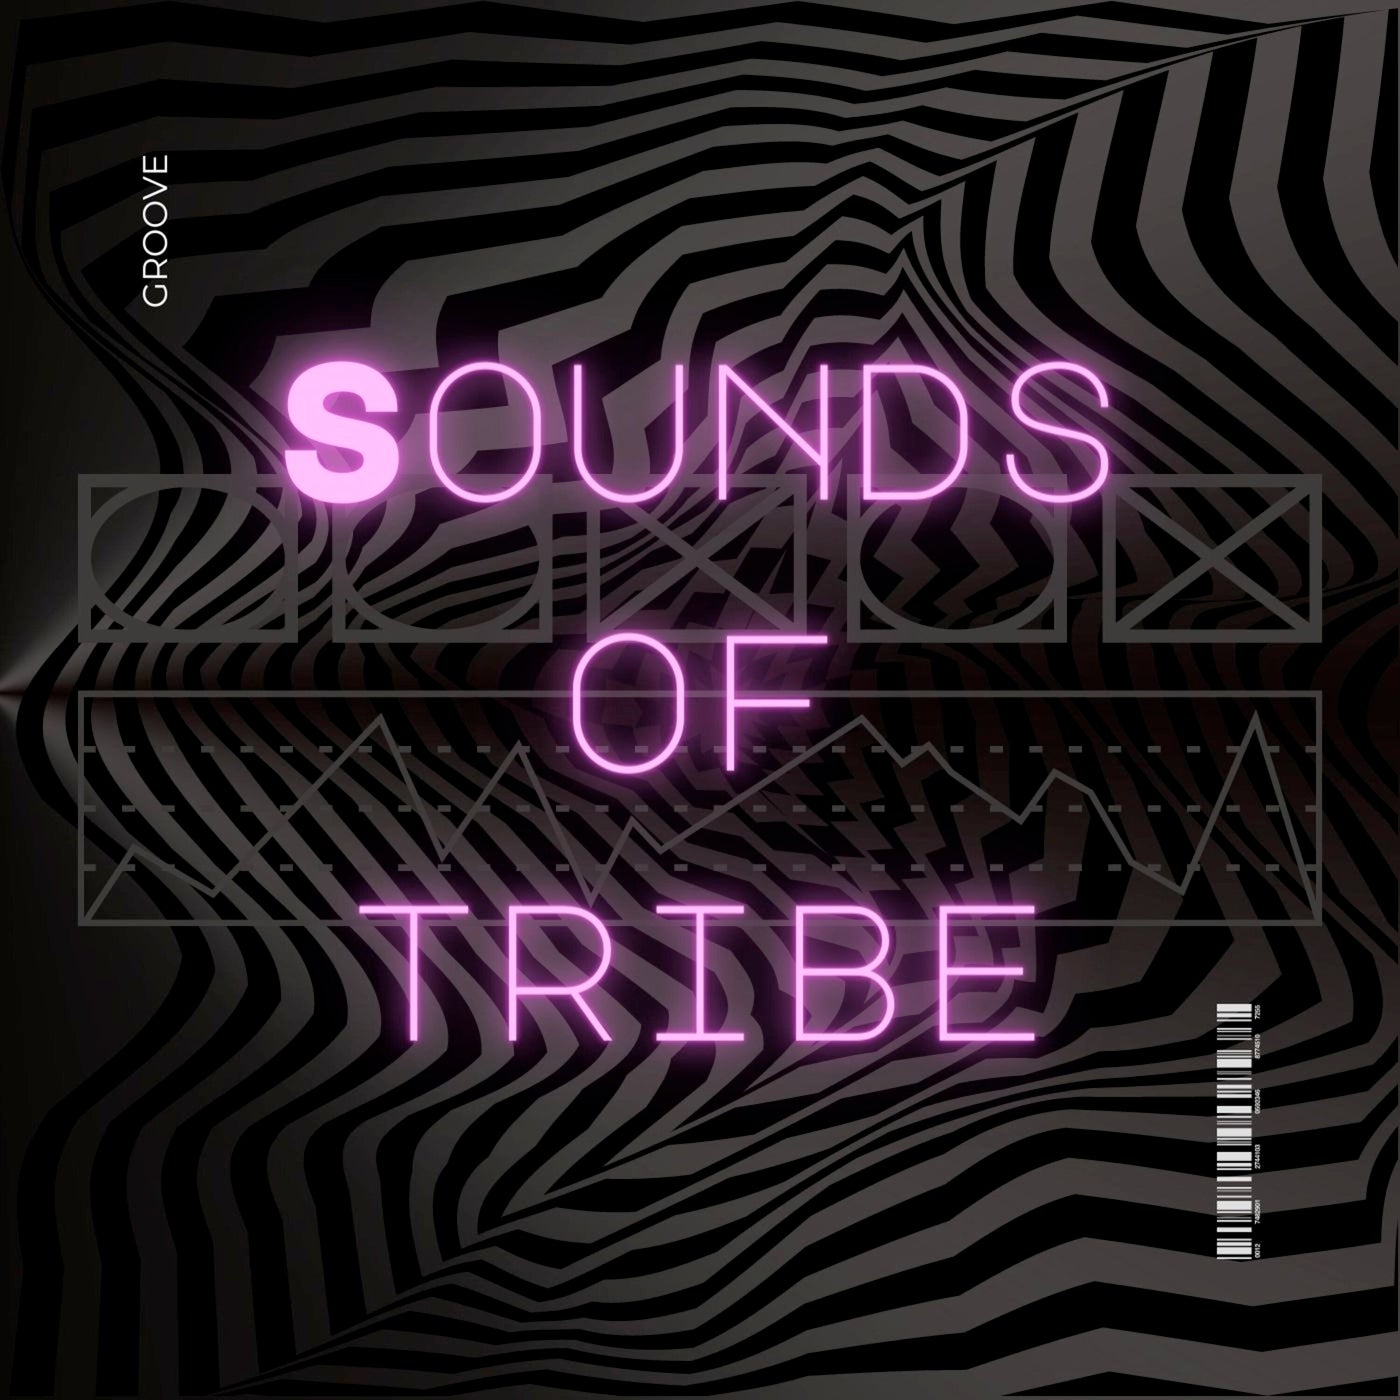 Sounds of Tribe